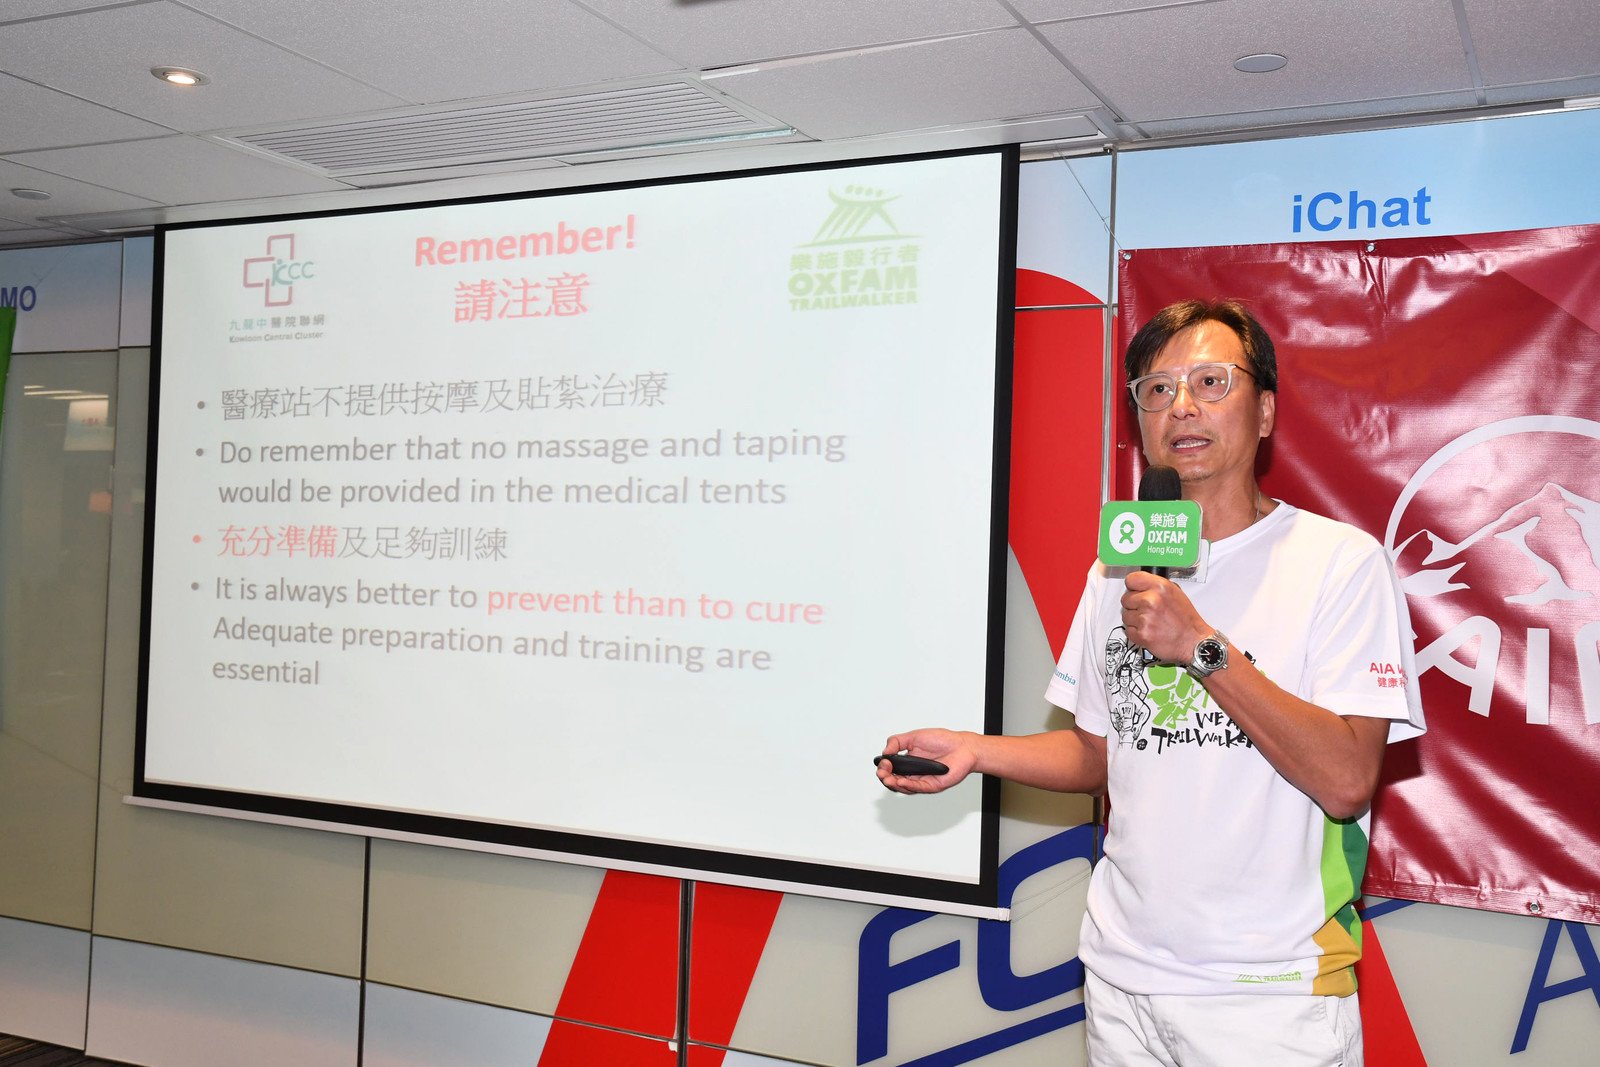 Dr. Kenneth Wu, a specialist in Emergency Medicine, Associate Consultant, Accident and Emergency Department of Queen Elizabeth Hospital, reminded participants to adequately train beforehand and shared tips on treating common medical problems.